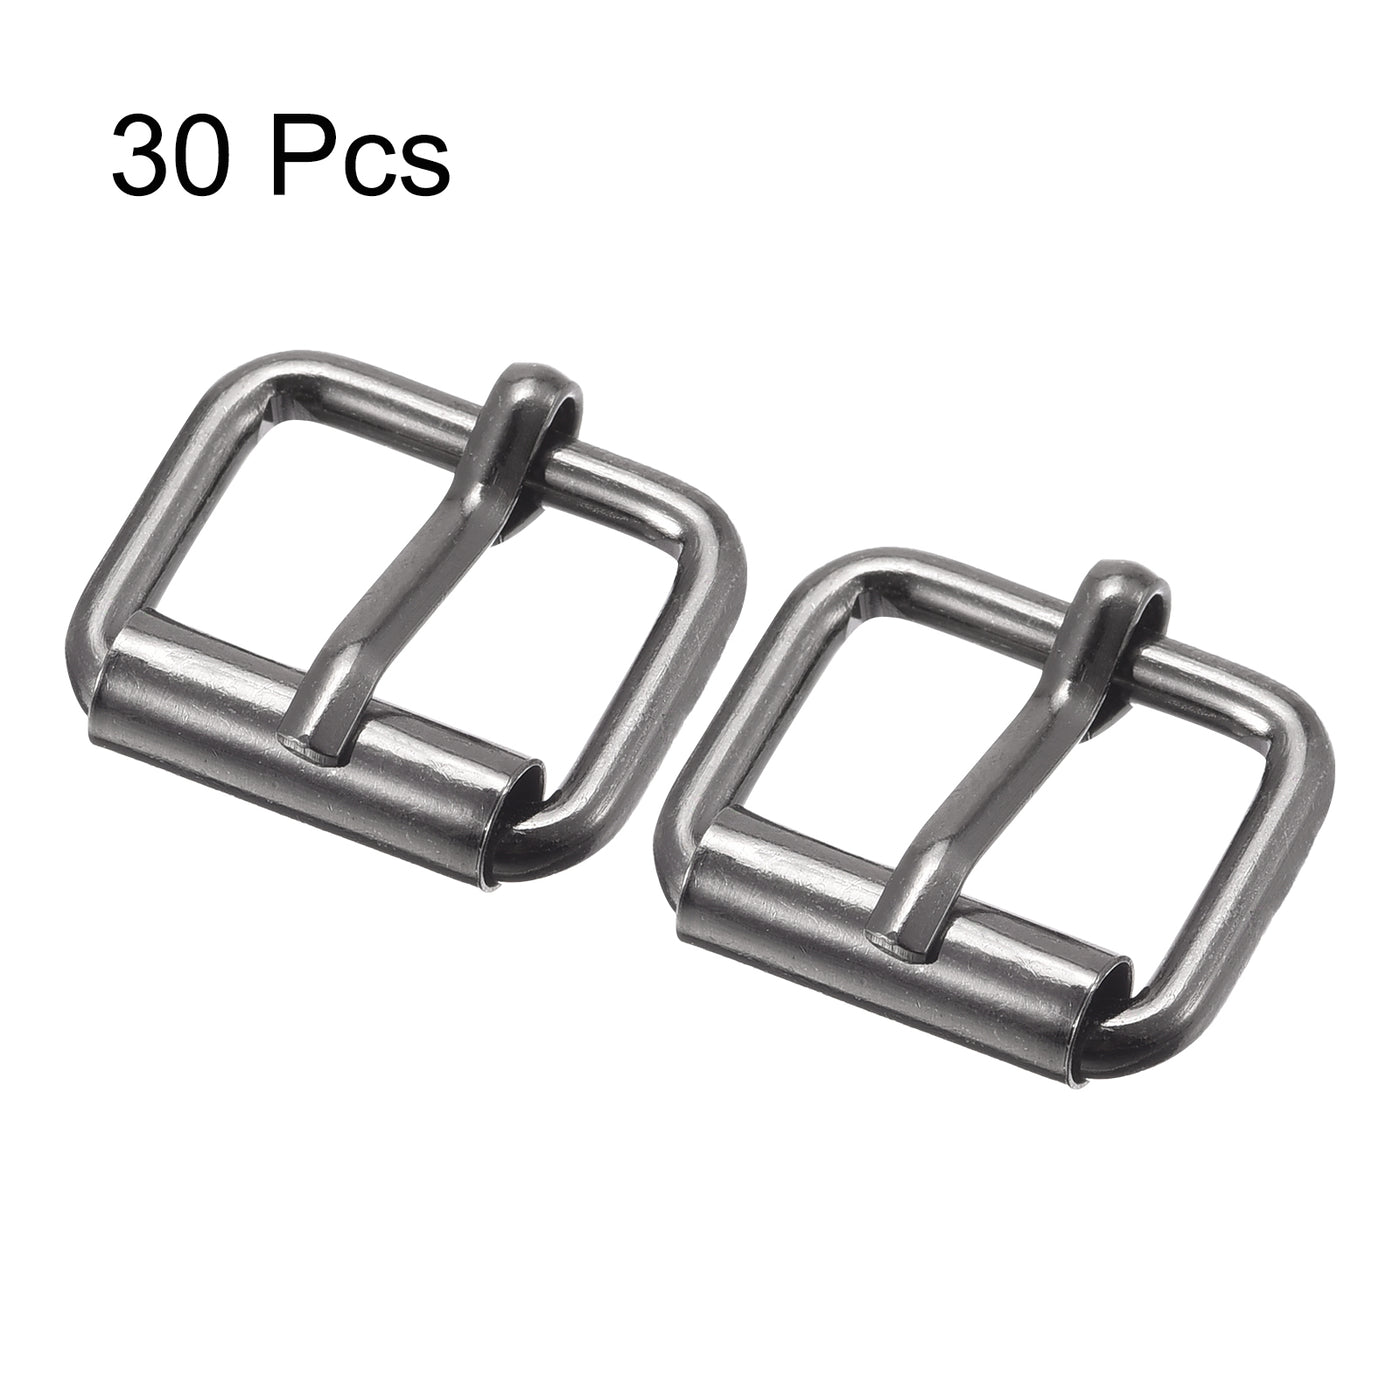 uxcell Uxcell 17mm(0.67") Metal Roller Buckles for Belts Bags Straps DIY Dark Gray 30pcs